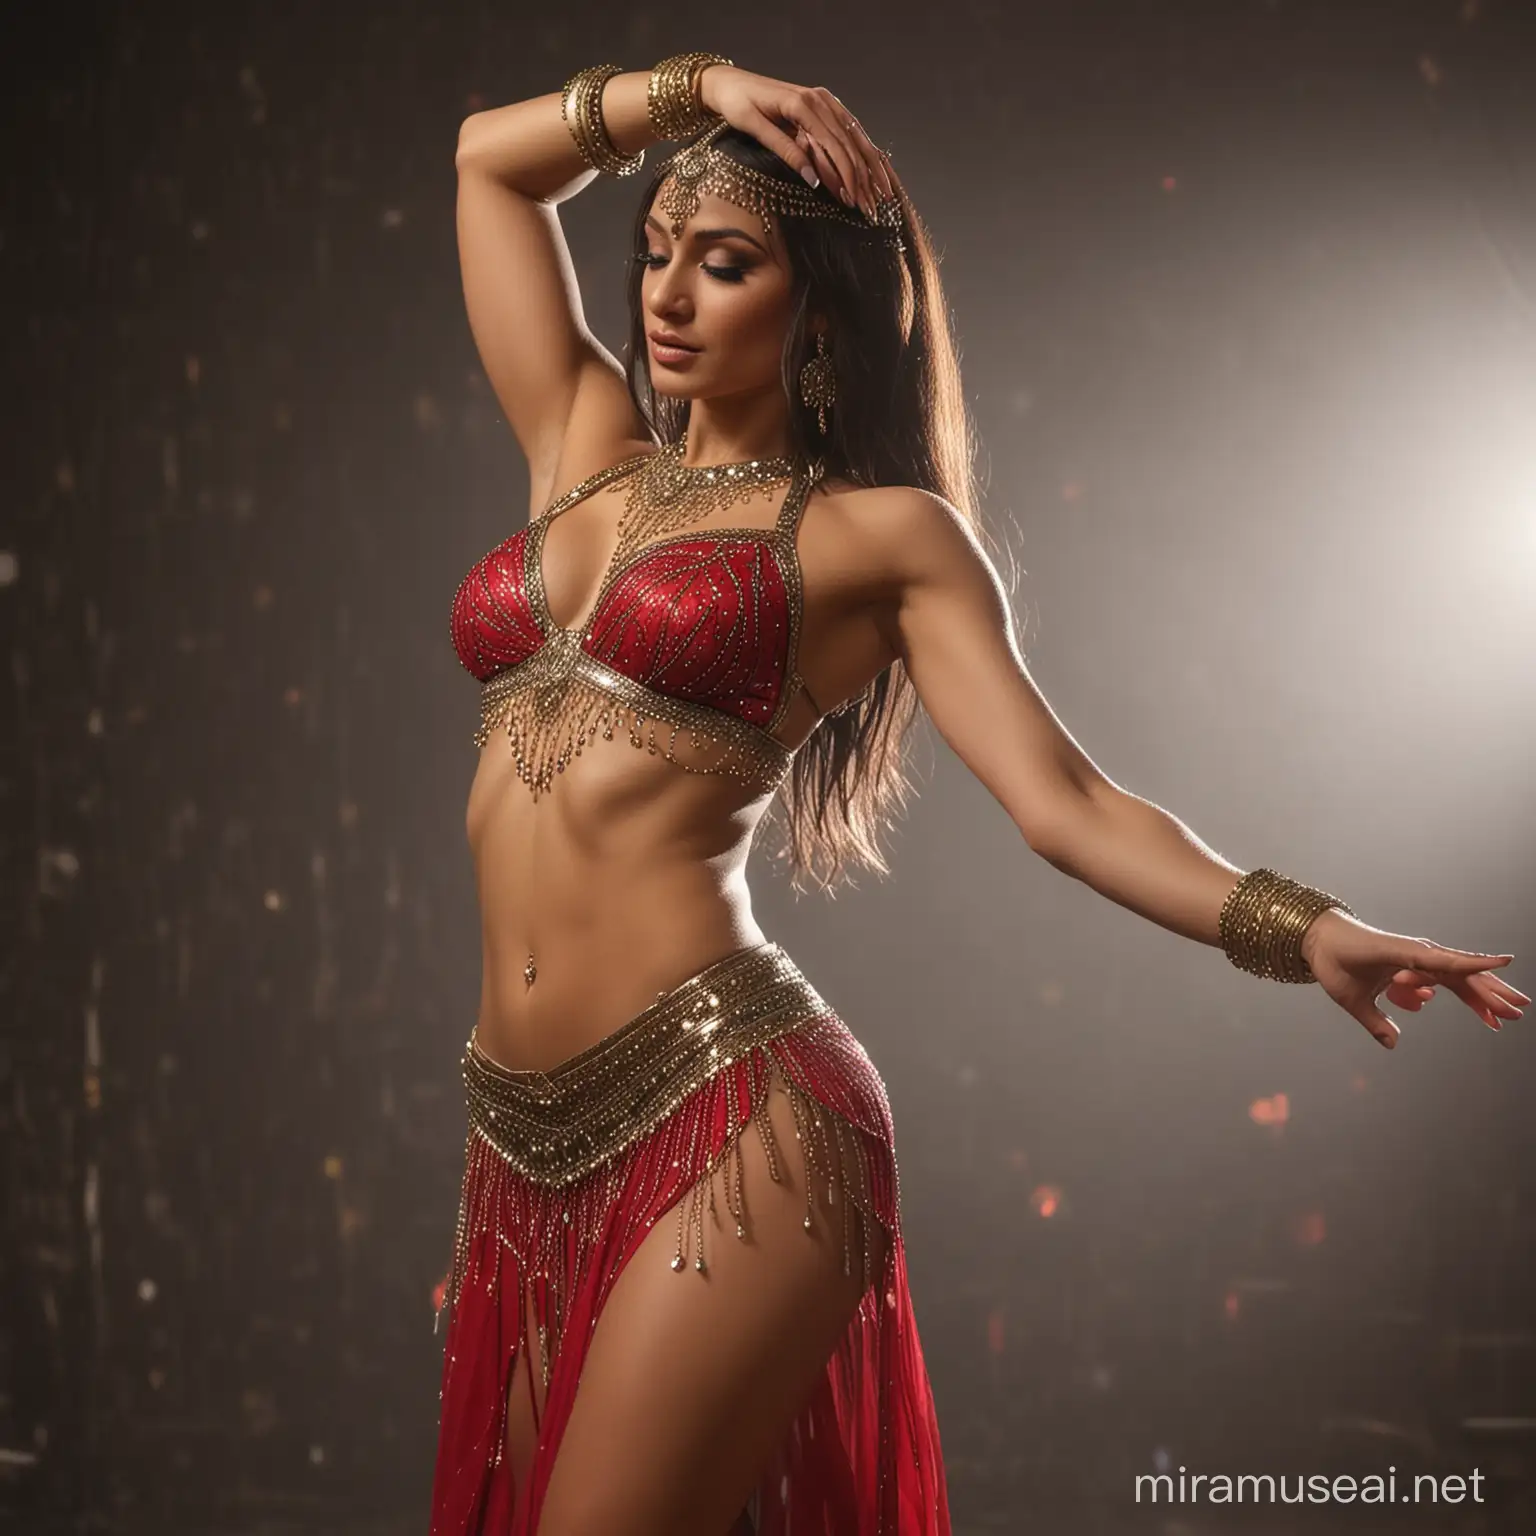 Graceful Belly Dancer Showcasing Masterful Movements and Toned Physique